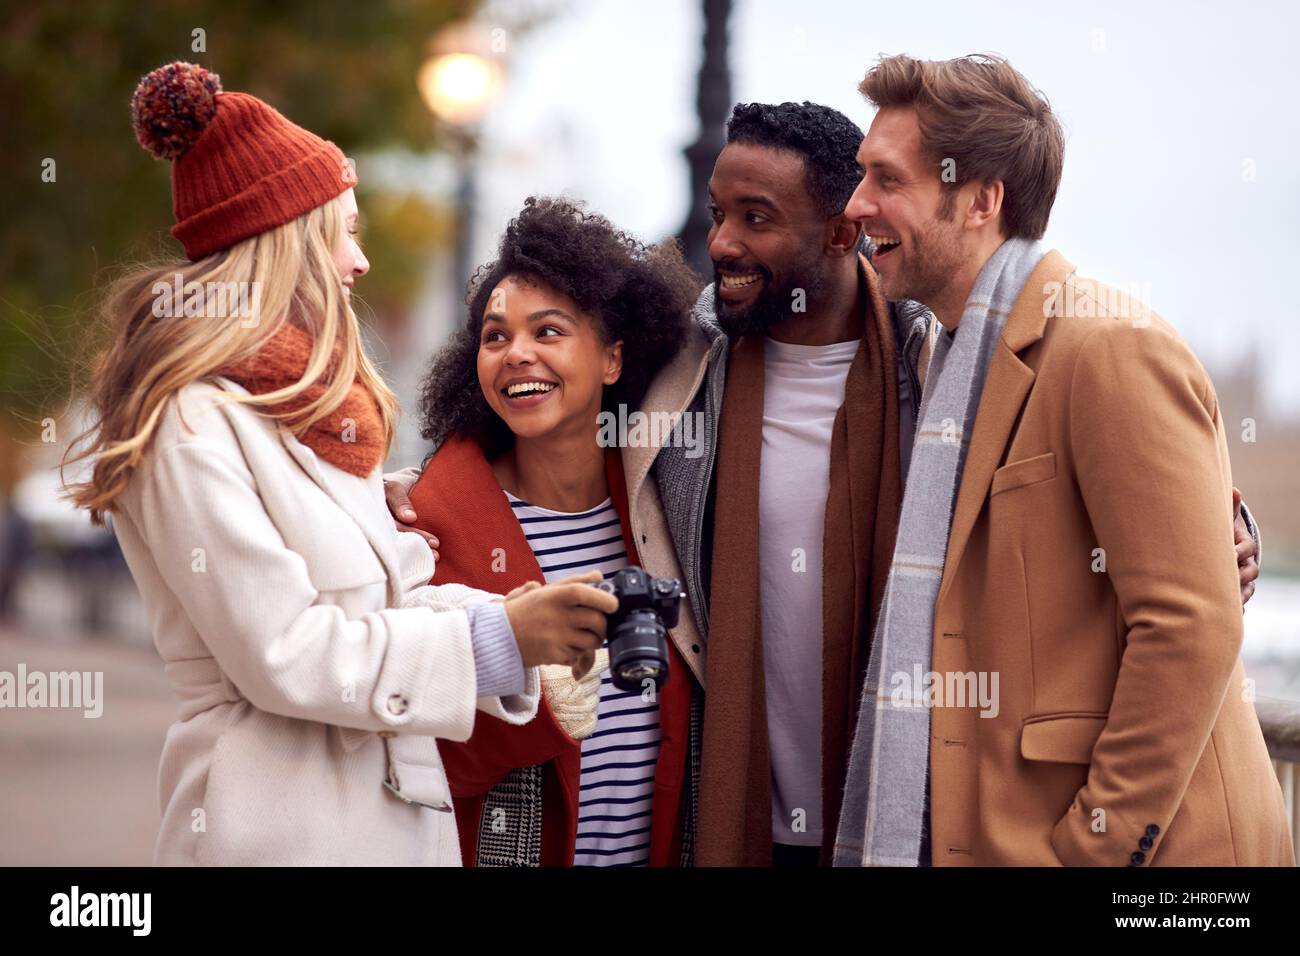 Group Of Friends Outdoors Wearing Coats And Scarves Looking At Photos On Camera In Autumn London Stock Photo